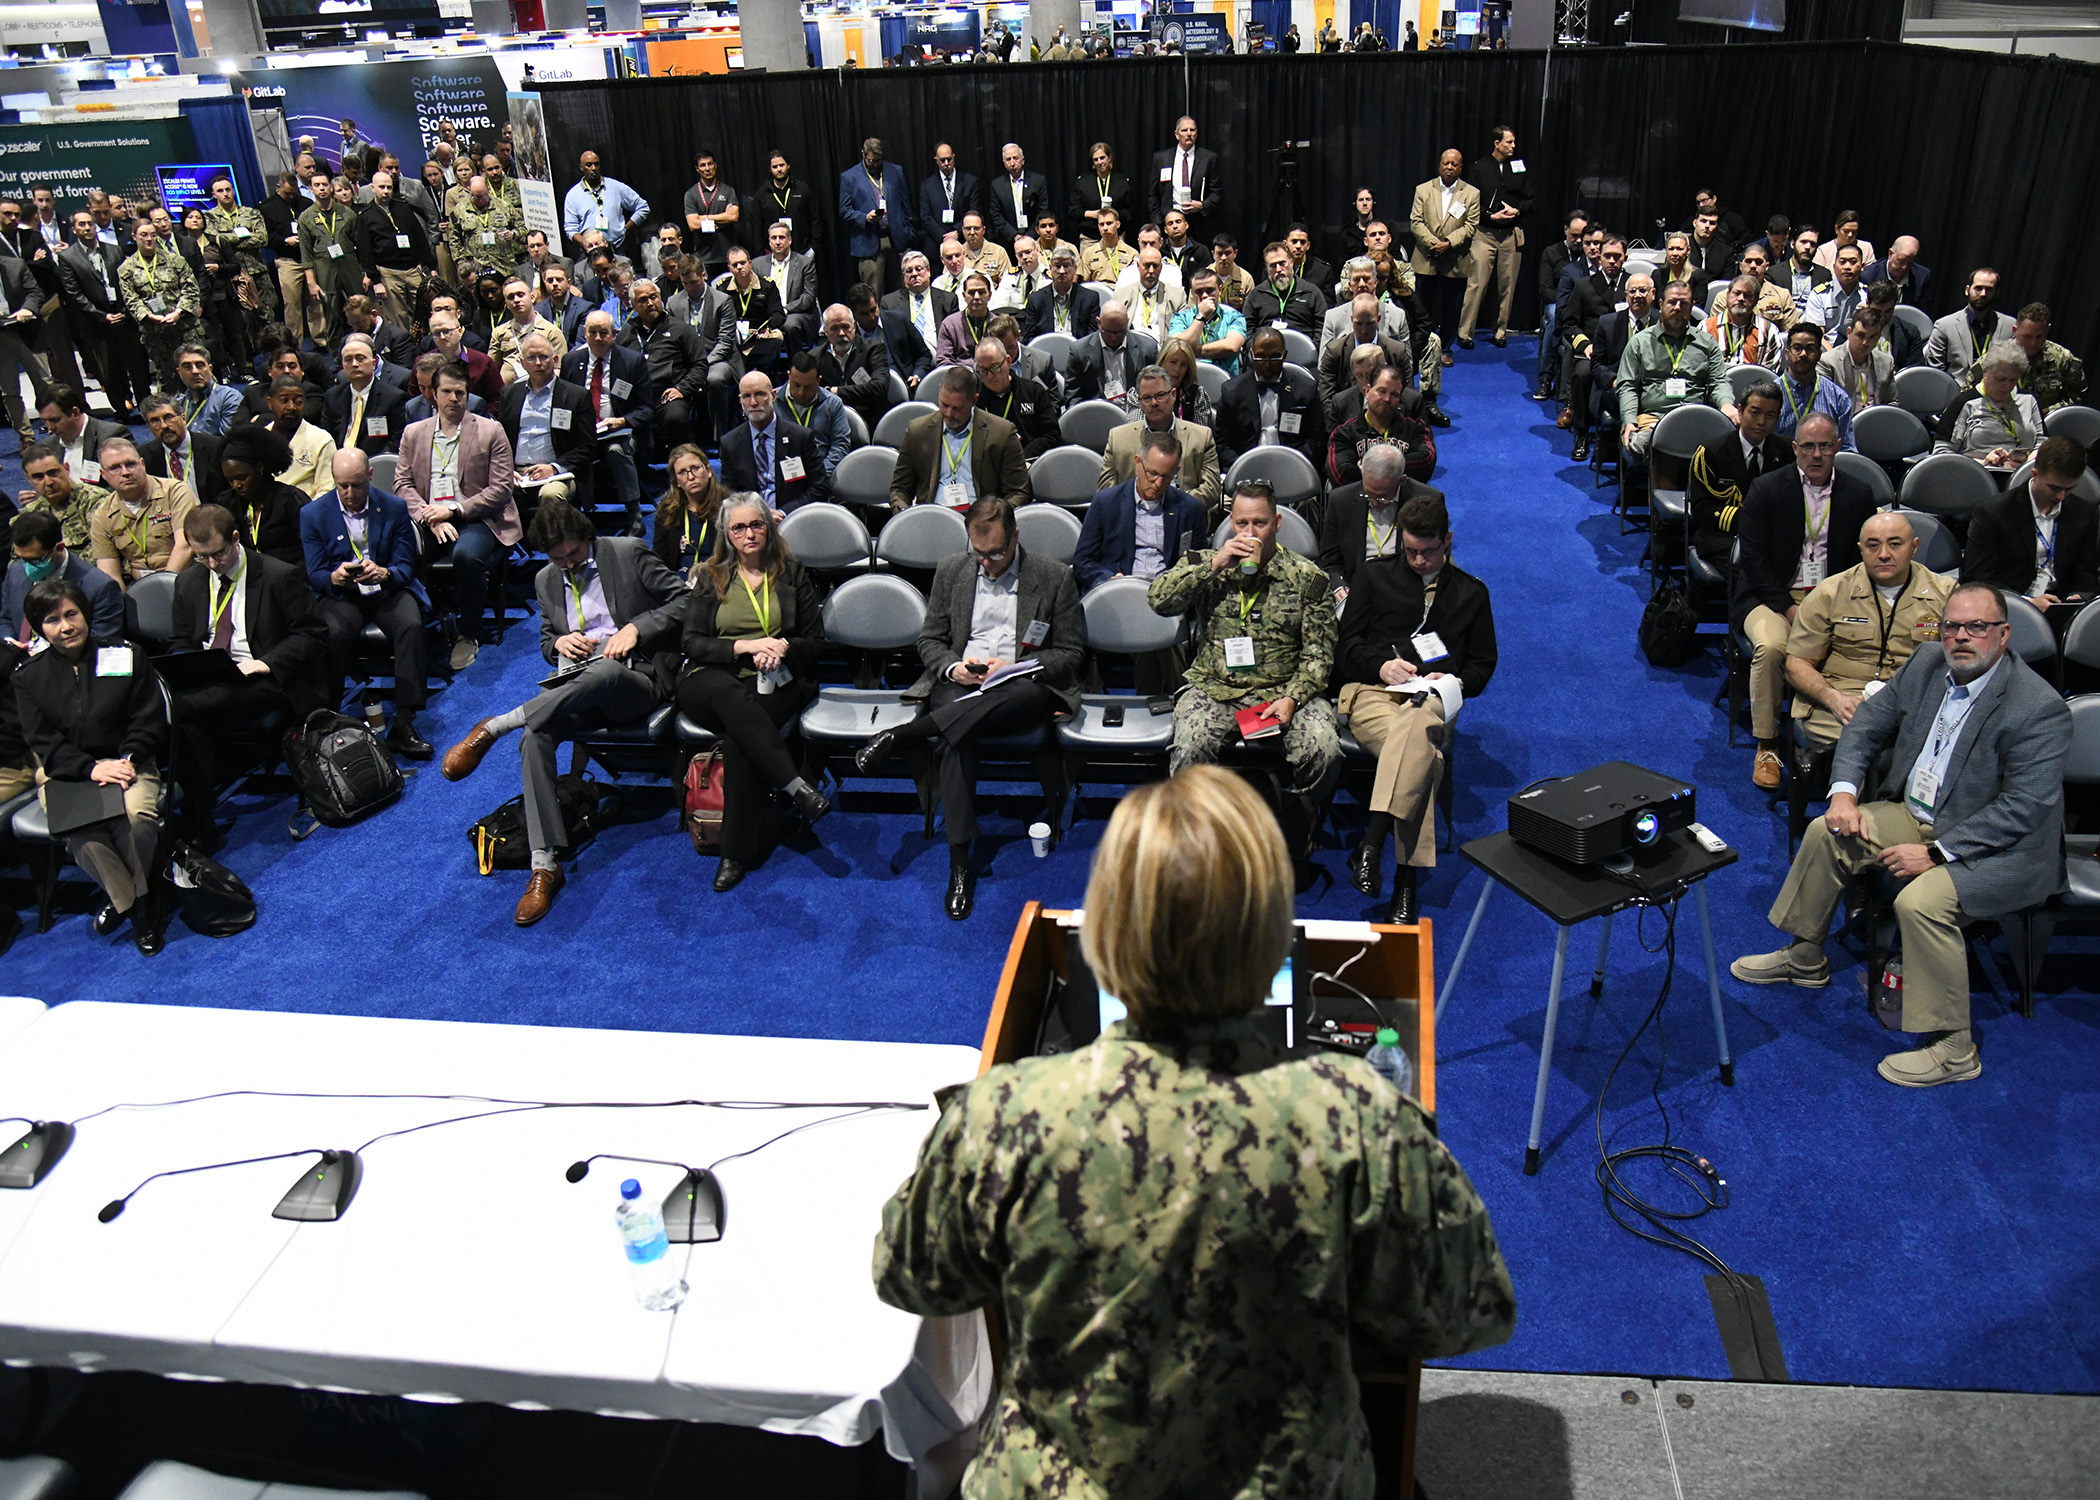 A U.S. female soldier faces a diversified audience giving a presentation